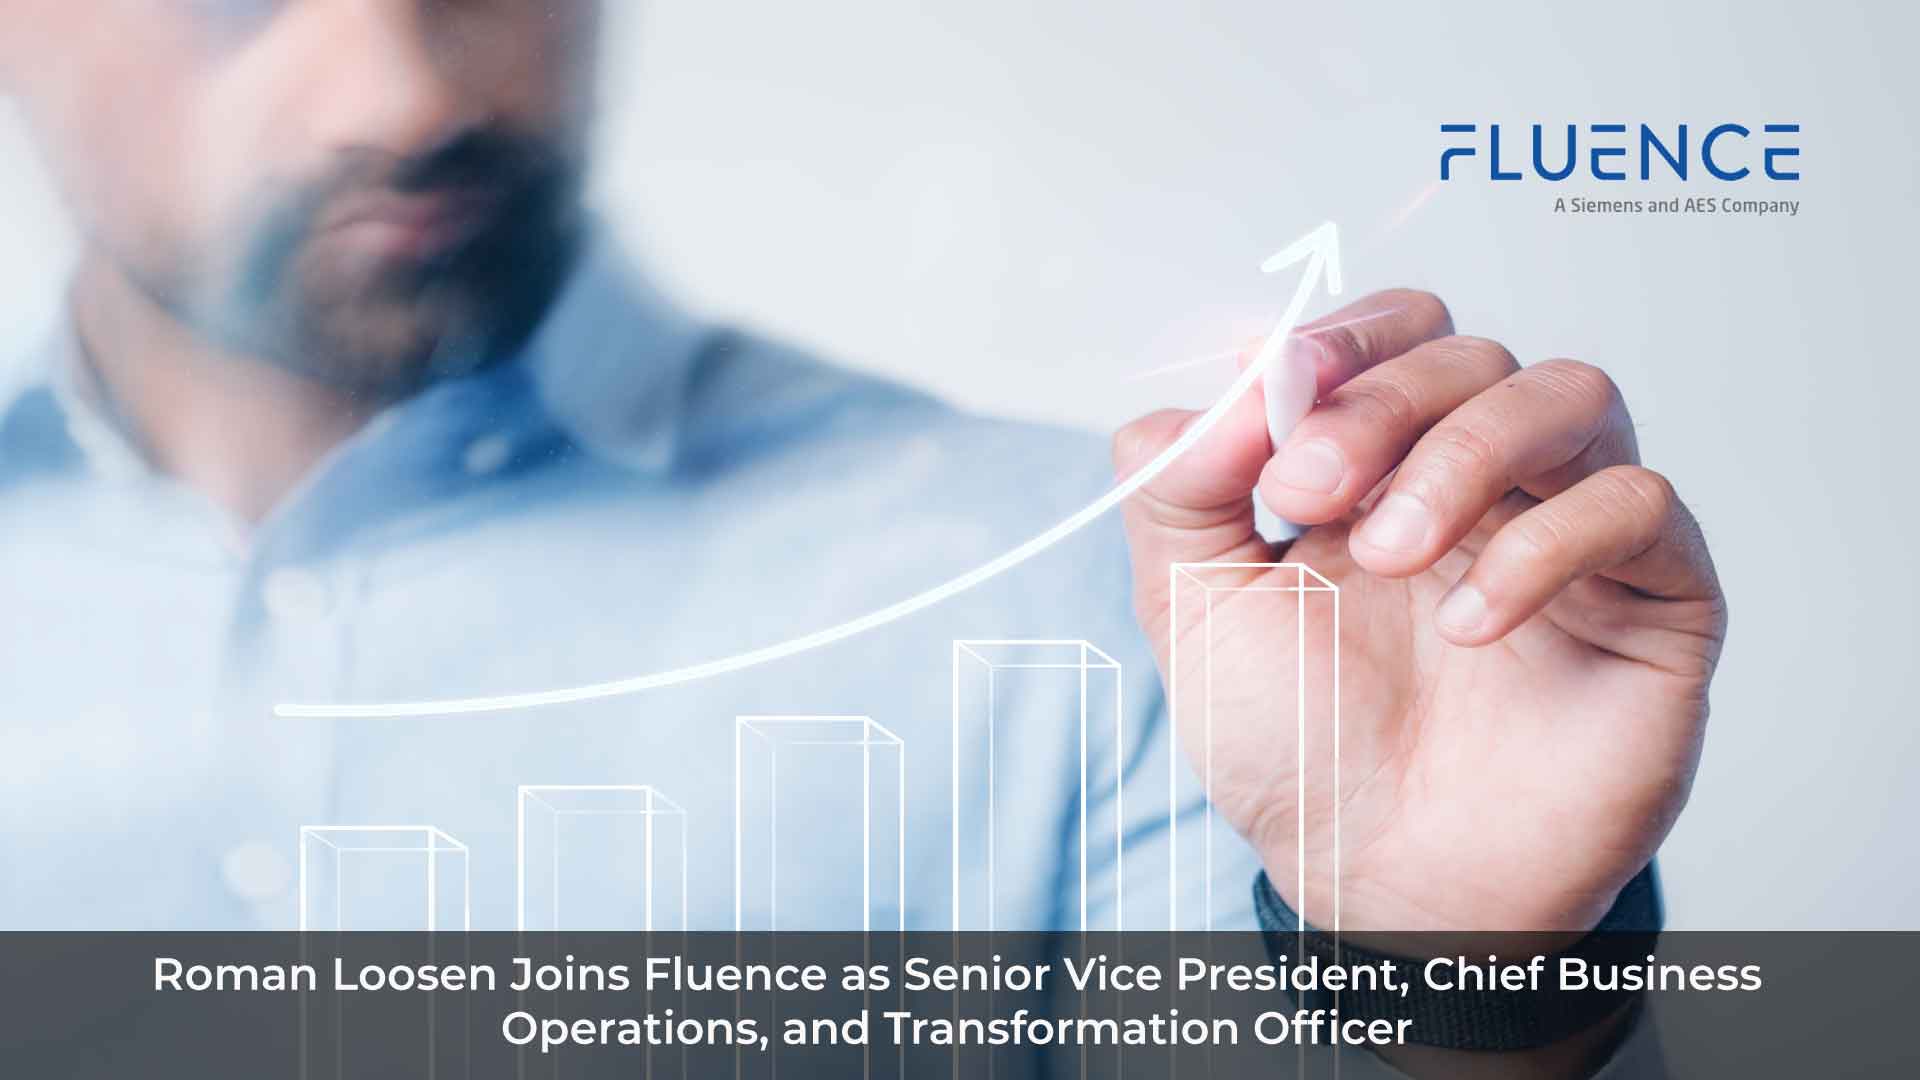 Roman Loosen Joins Fluence as Senior Vice President, Chief Business Operations and Transformation Officer to Oversee Operational Excellence